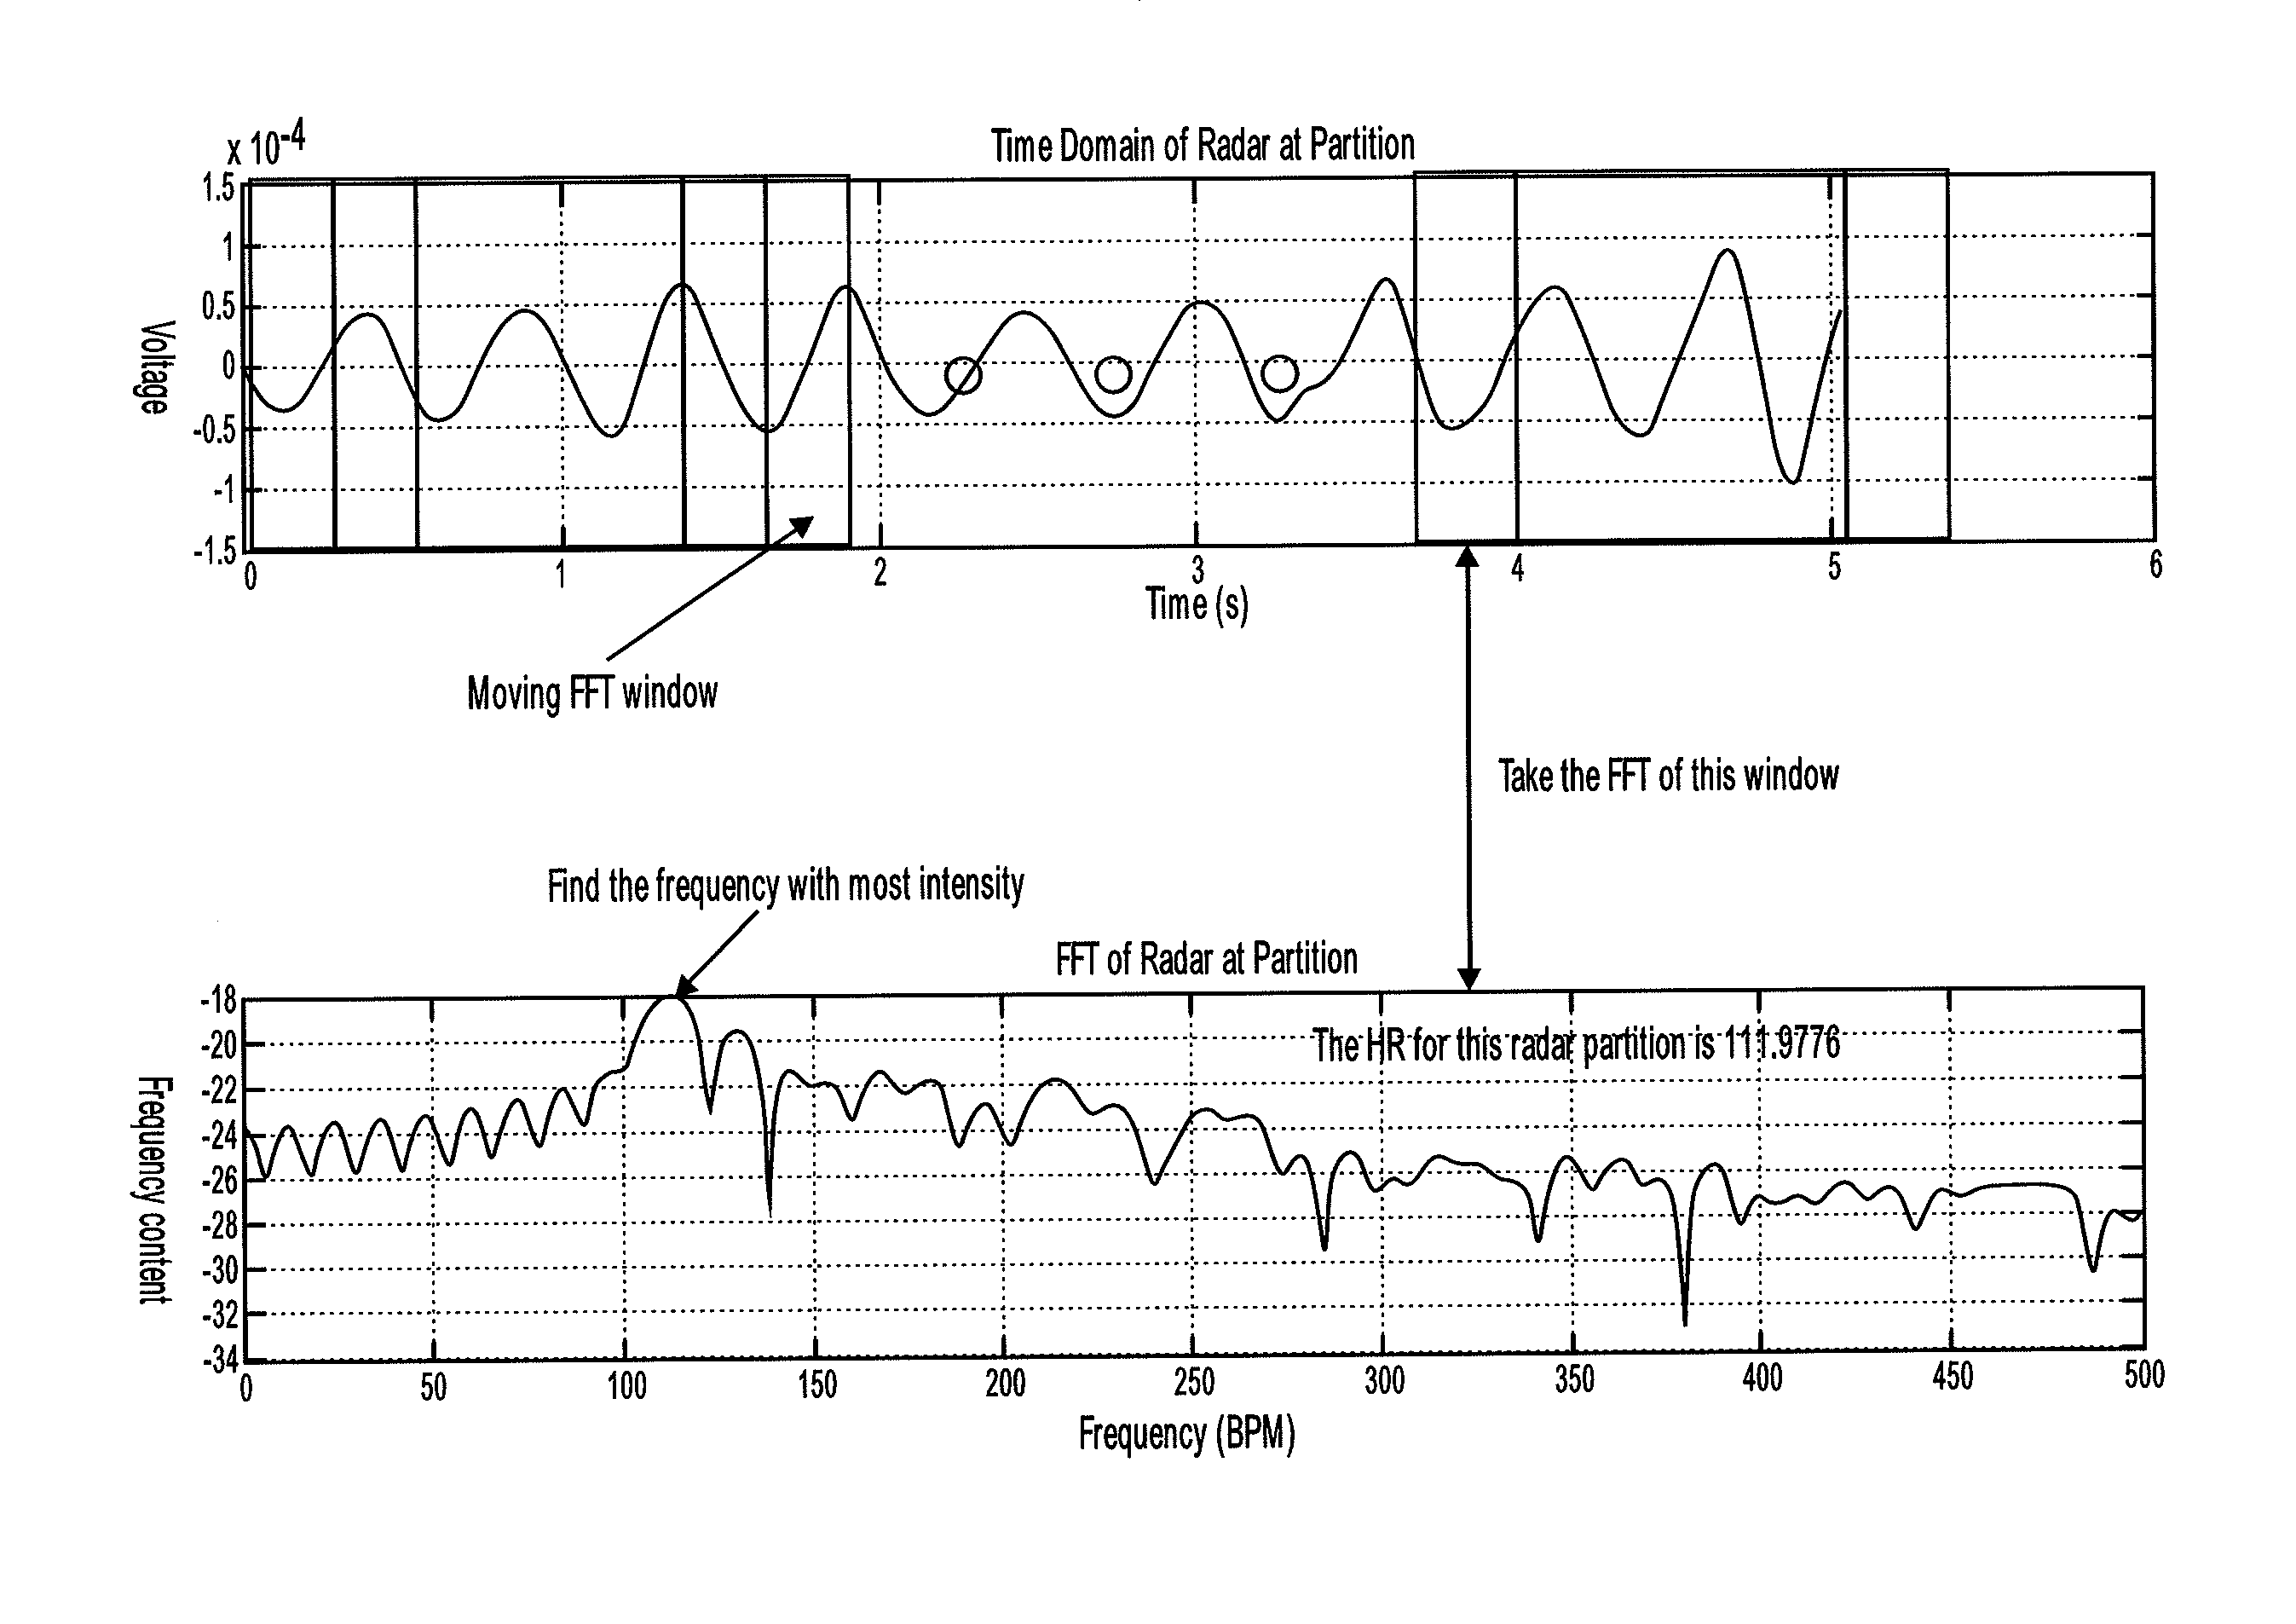 Fetal monitoring device and methods